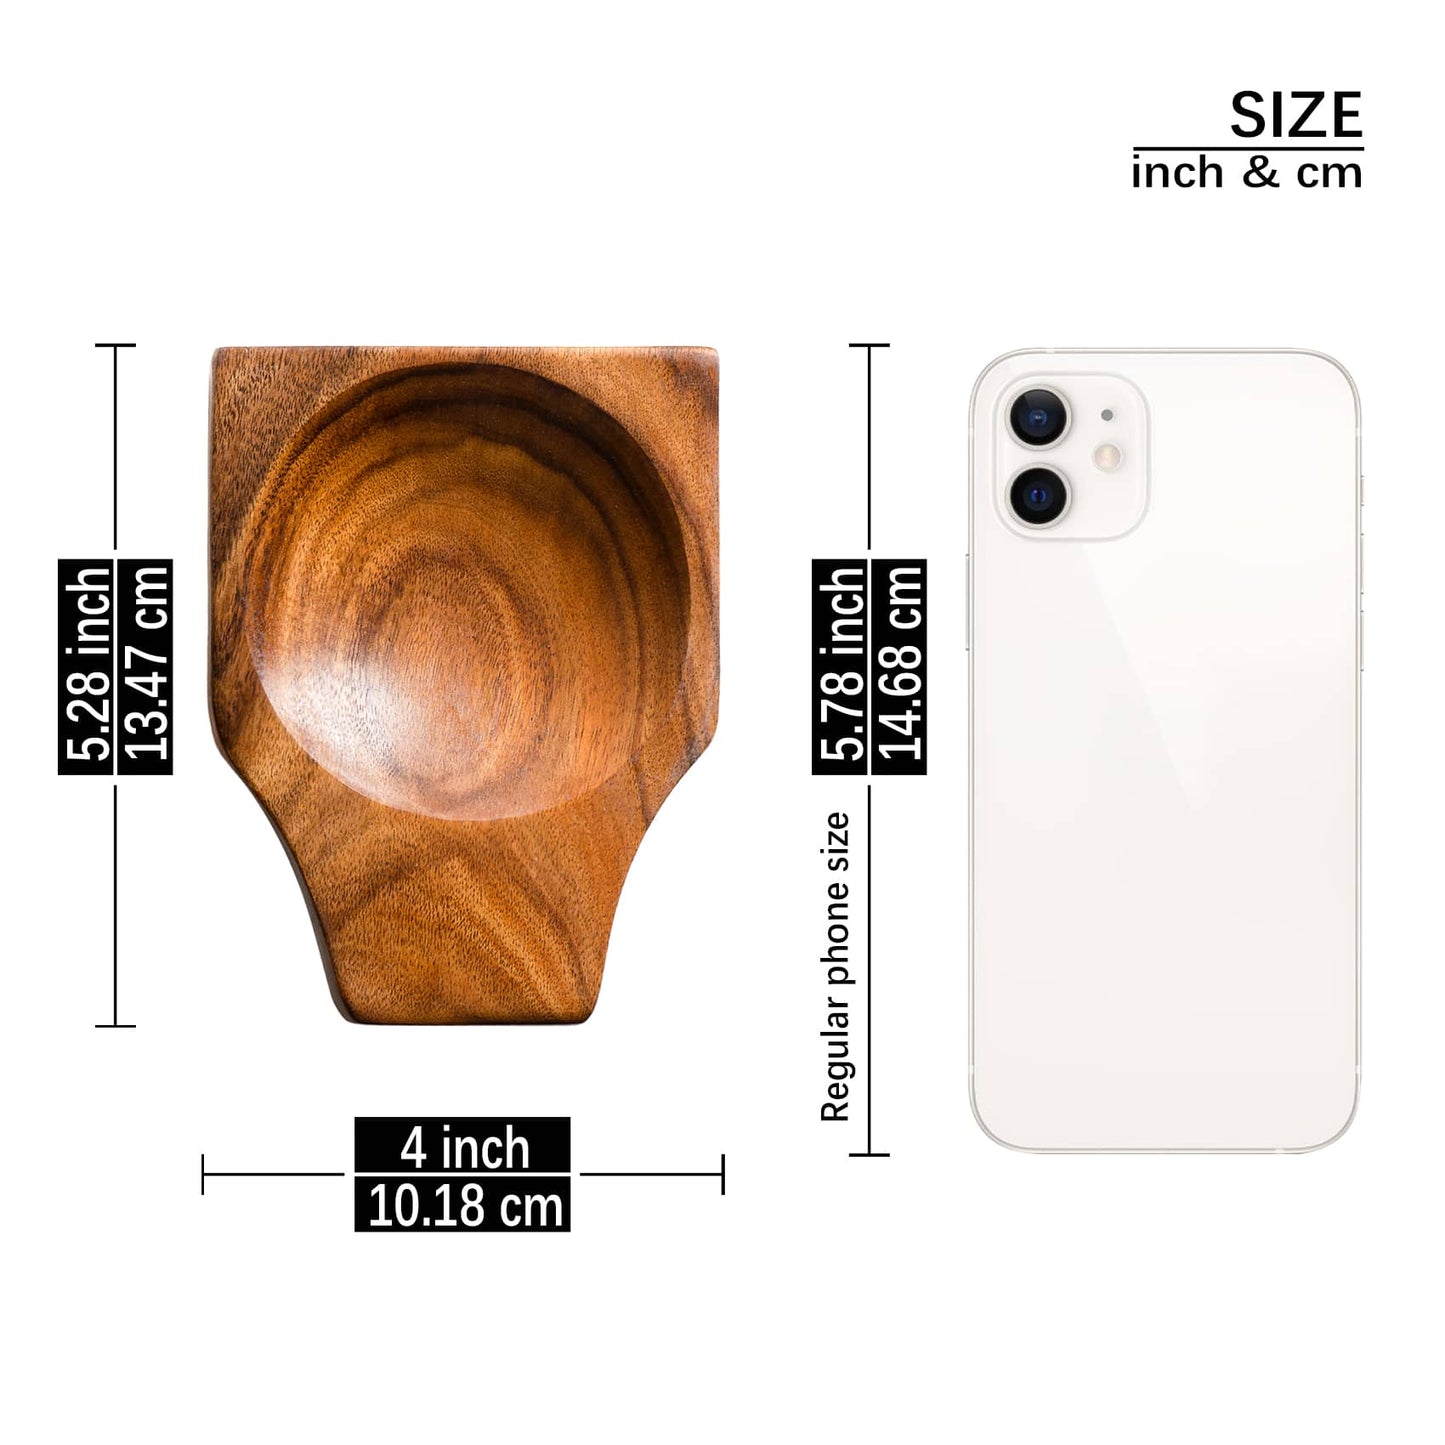 Dimensions of the display spoon rest, 5.3 inches long by 4 inches wide